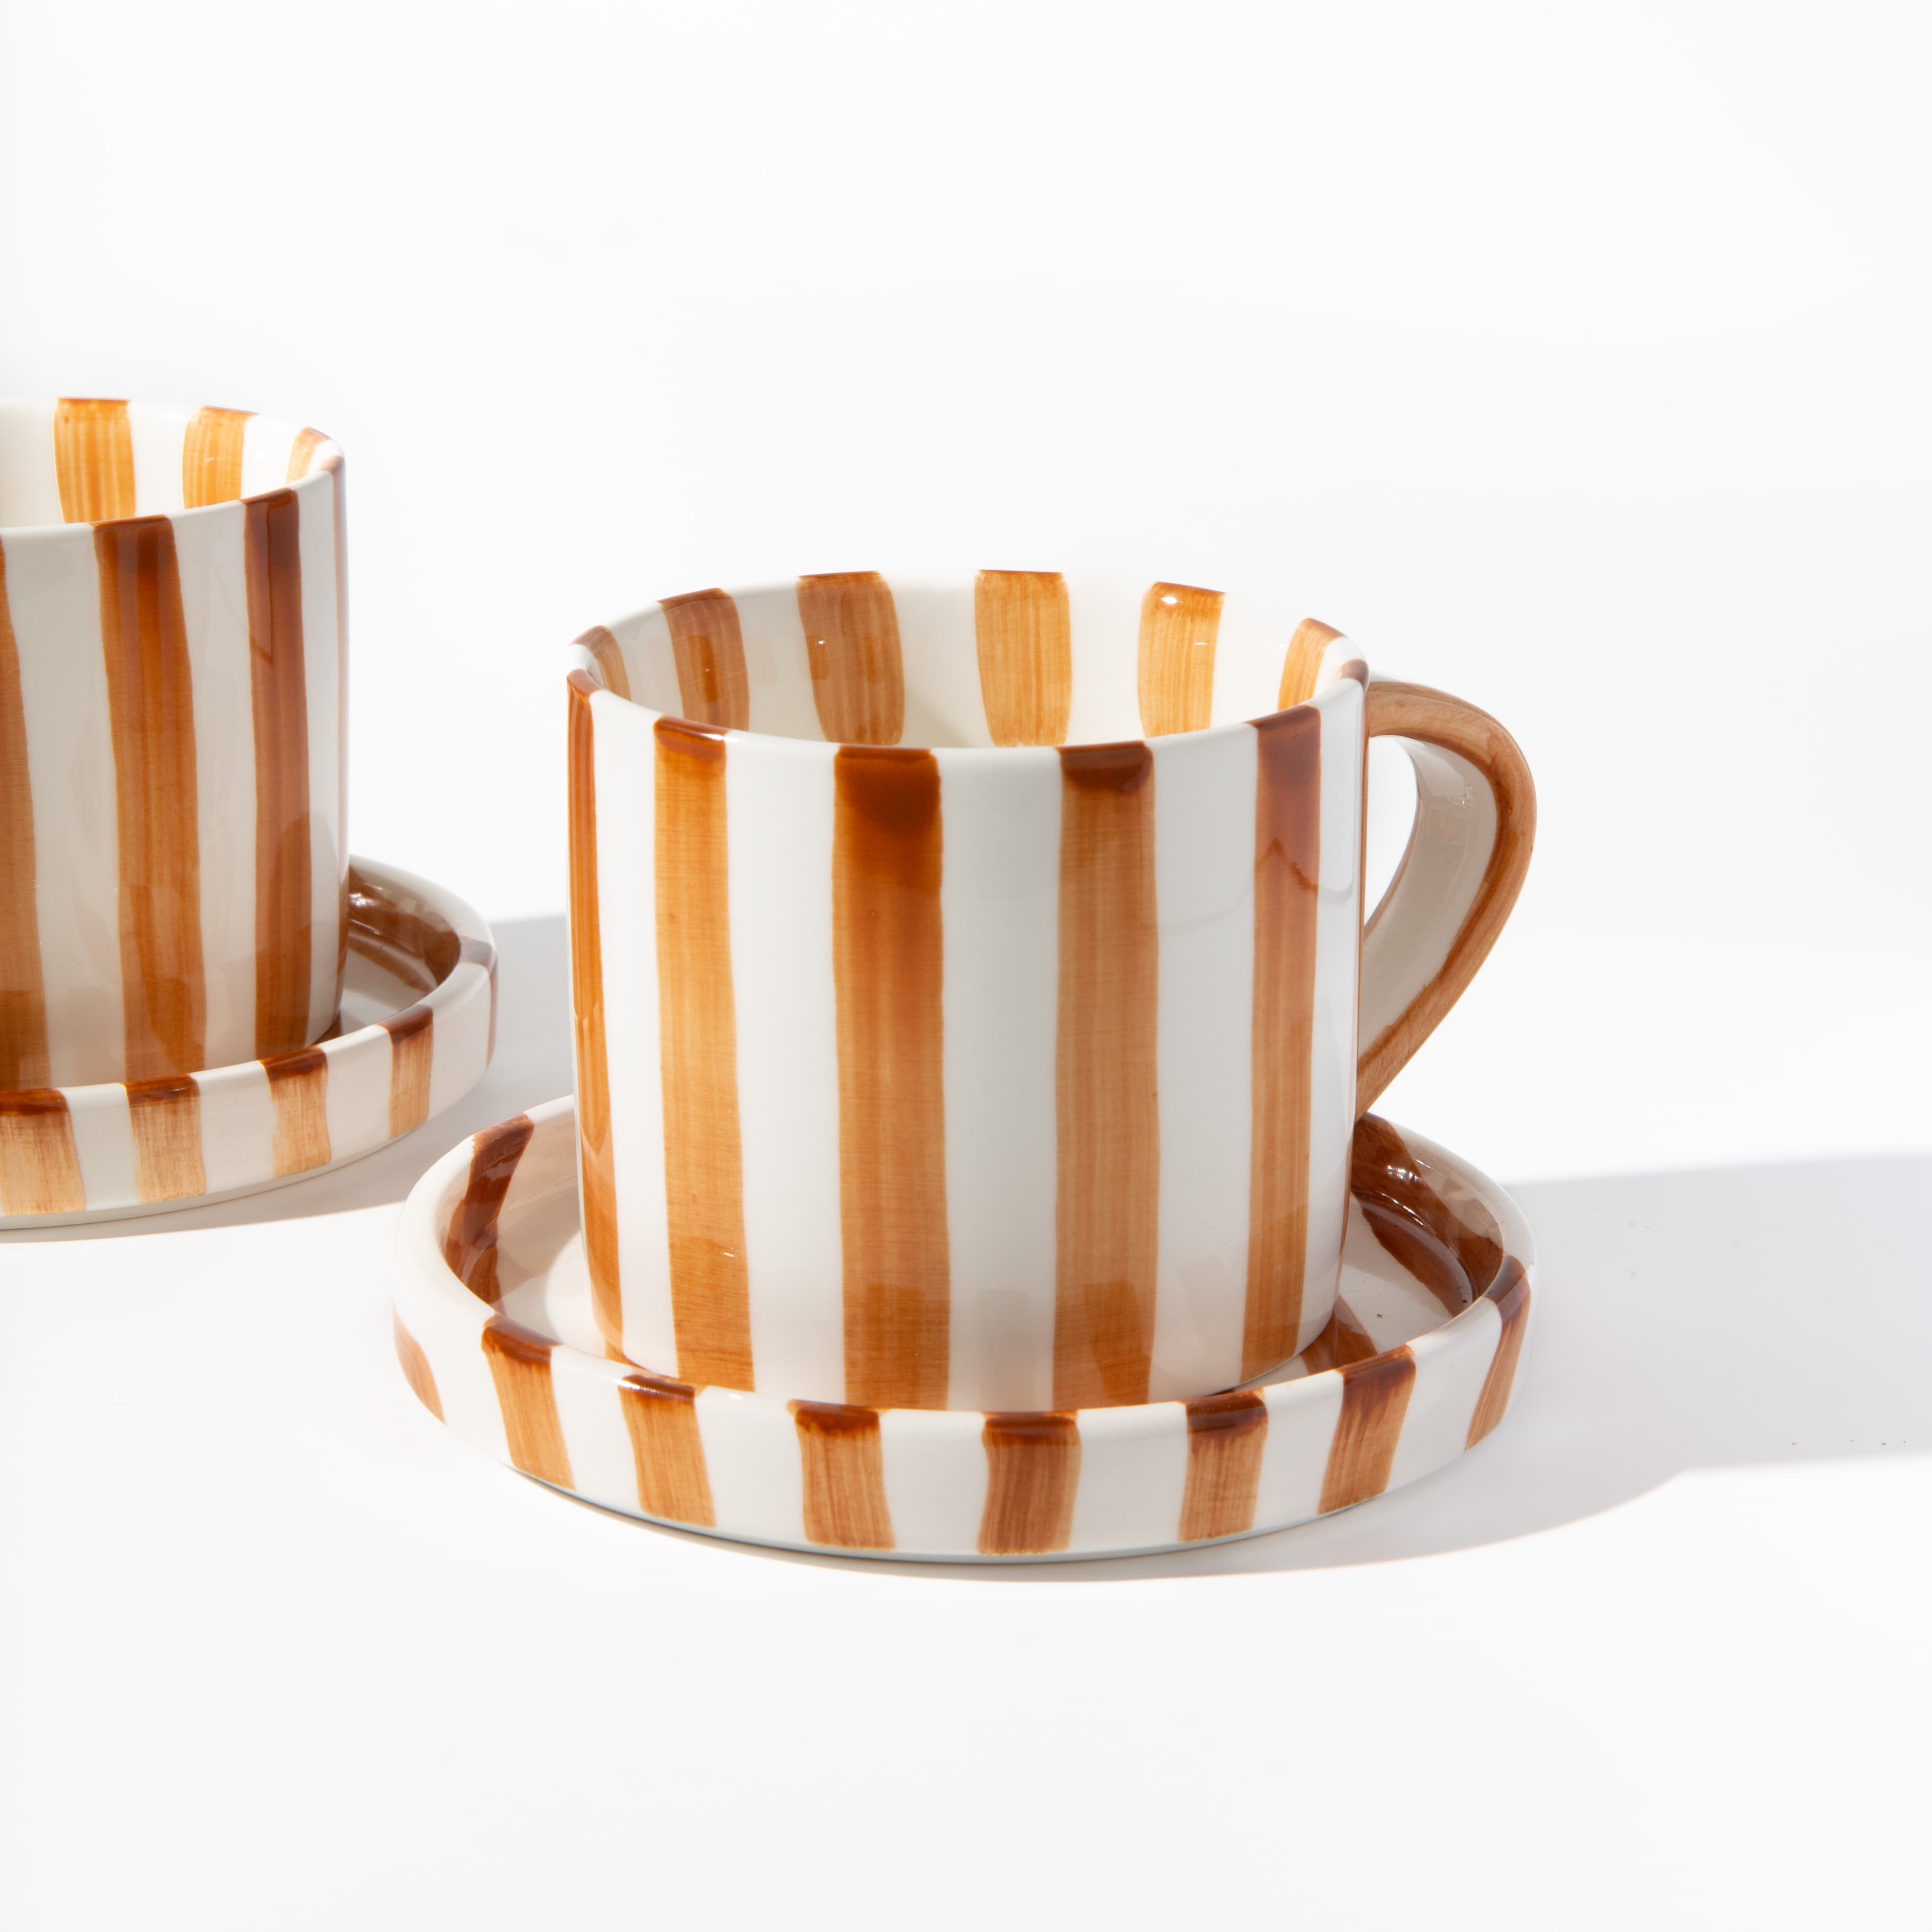 STRIPED CUP + SAUCER